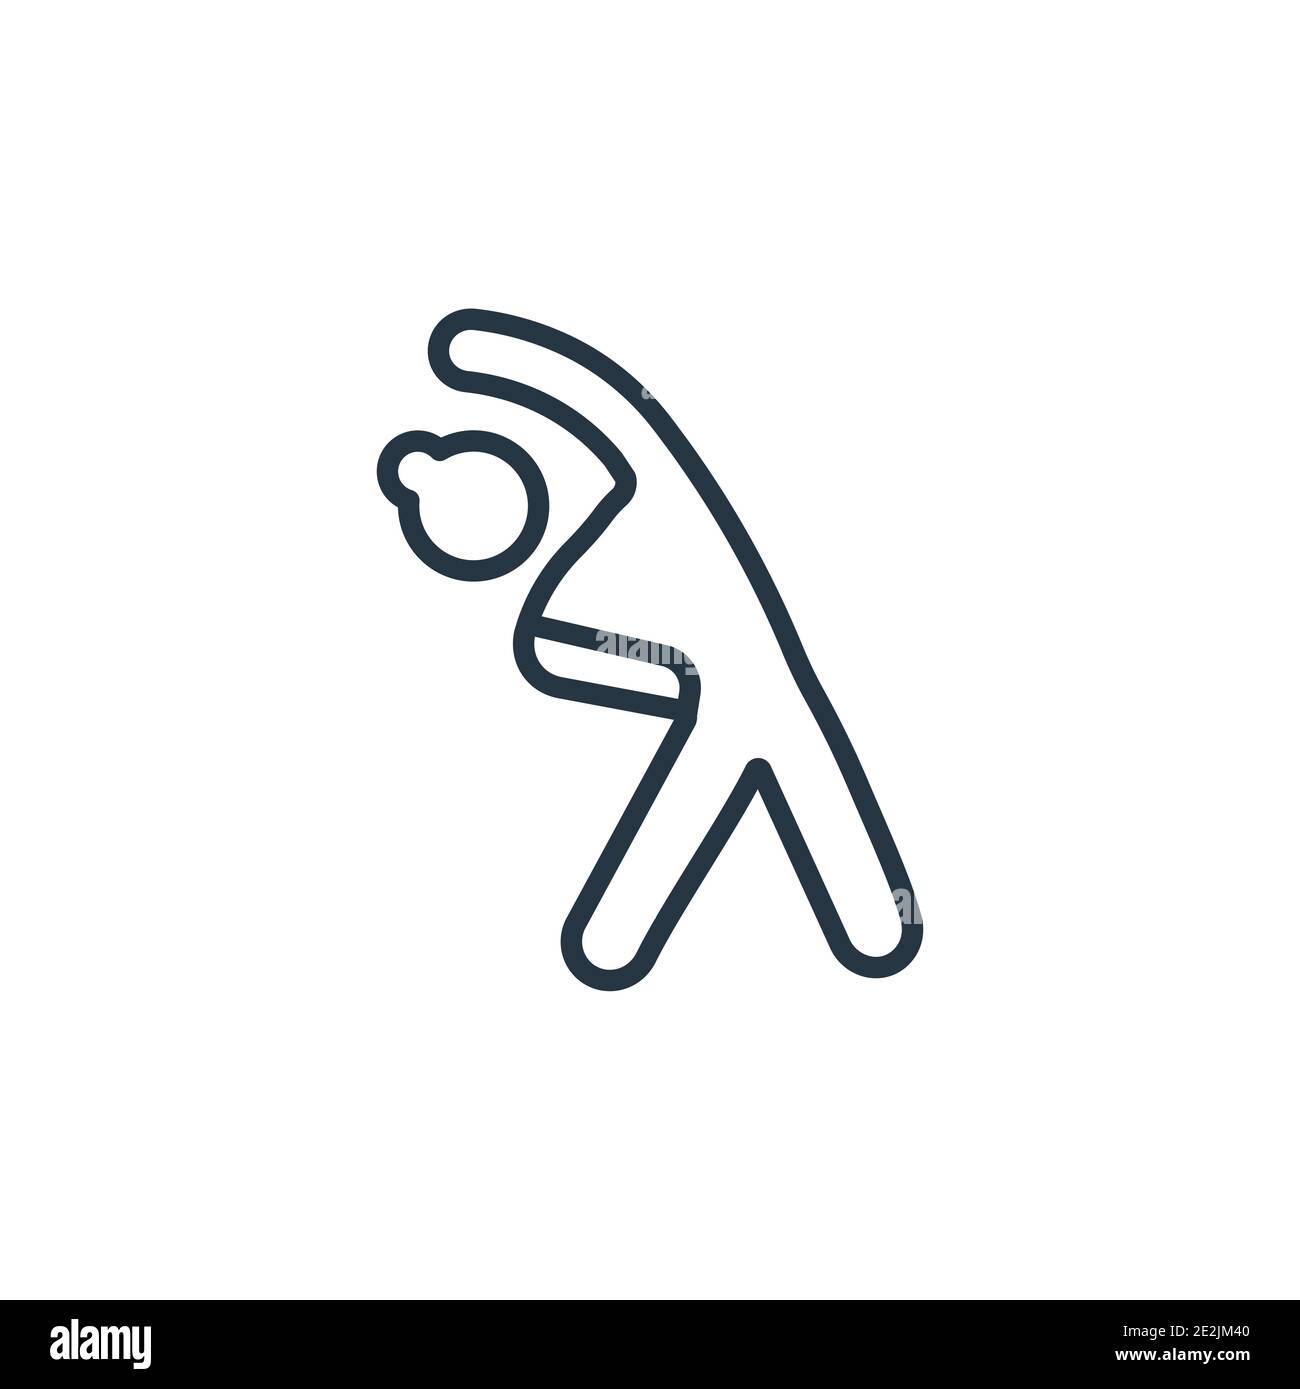 Exercise outline vector icon. Thin line black exercise icon, flat